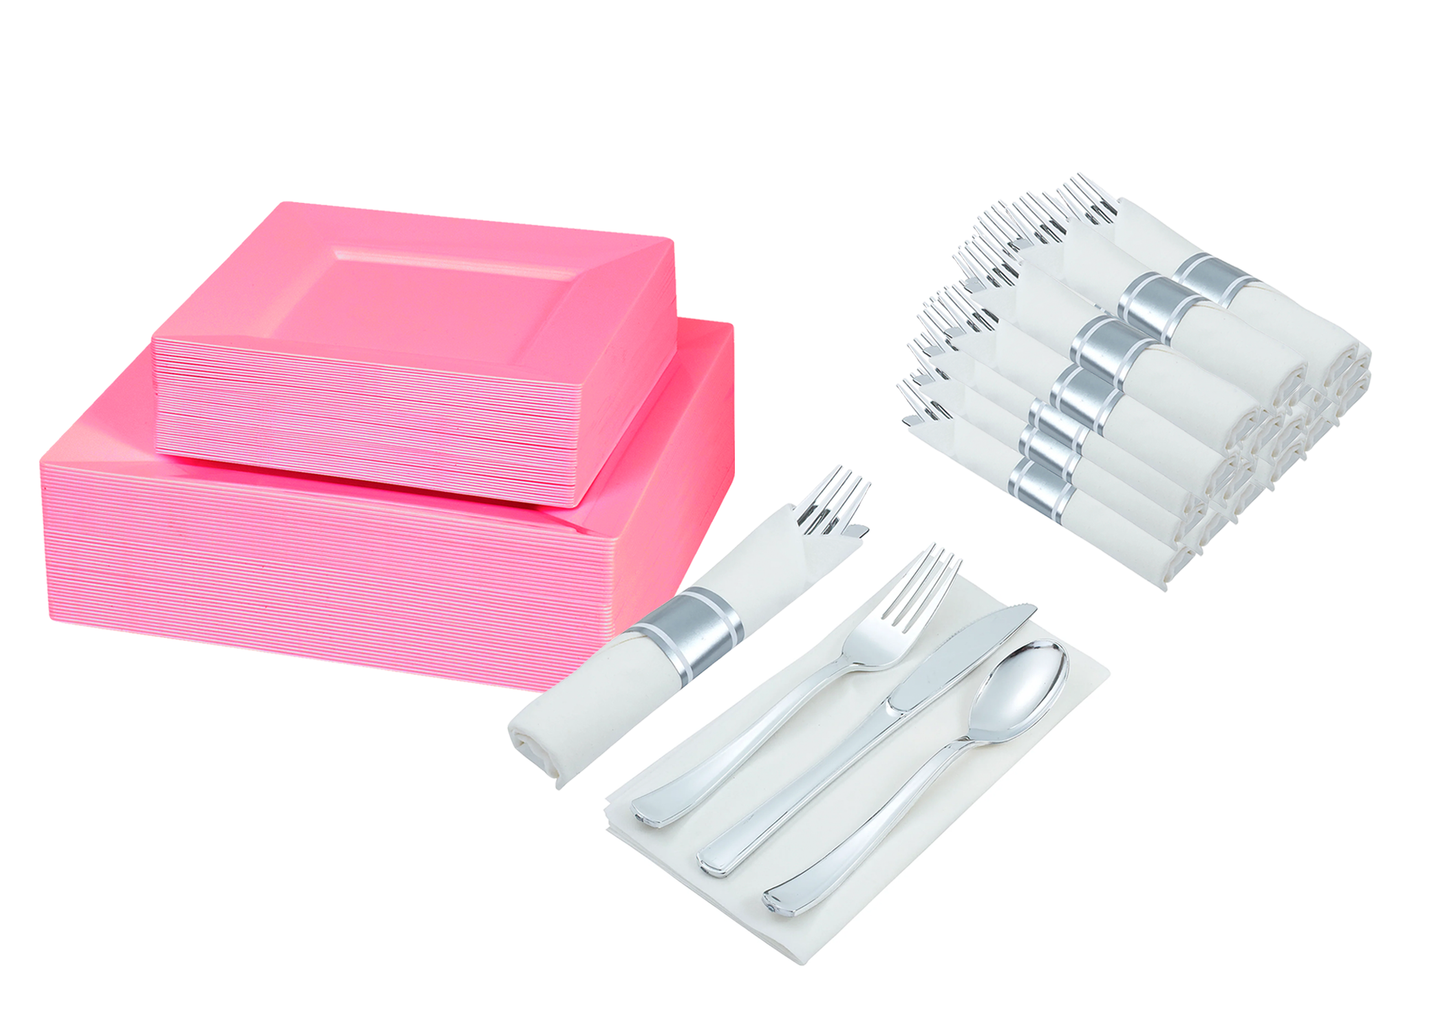 Disposable dinnerware set for 40 guests 280 pieces Includes: : 40 pink square plastic dinner plates, 40 salad plates, 50 pre-rolled linen feel napkins with silver spoons, forks & knives wrapped inside.